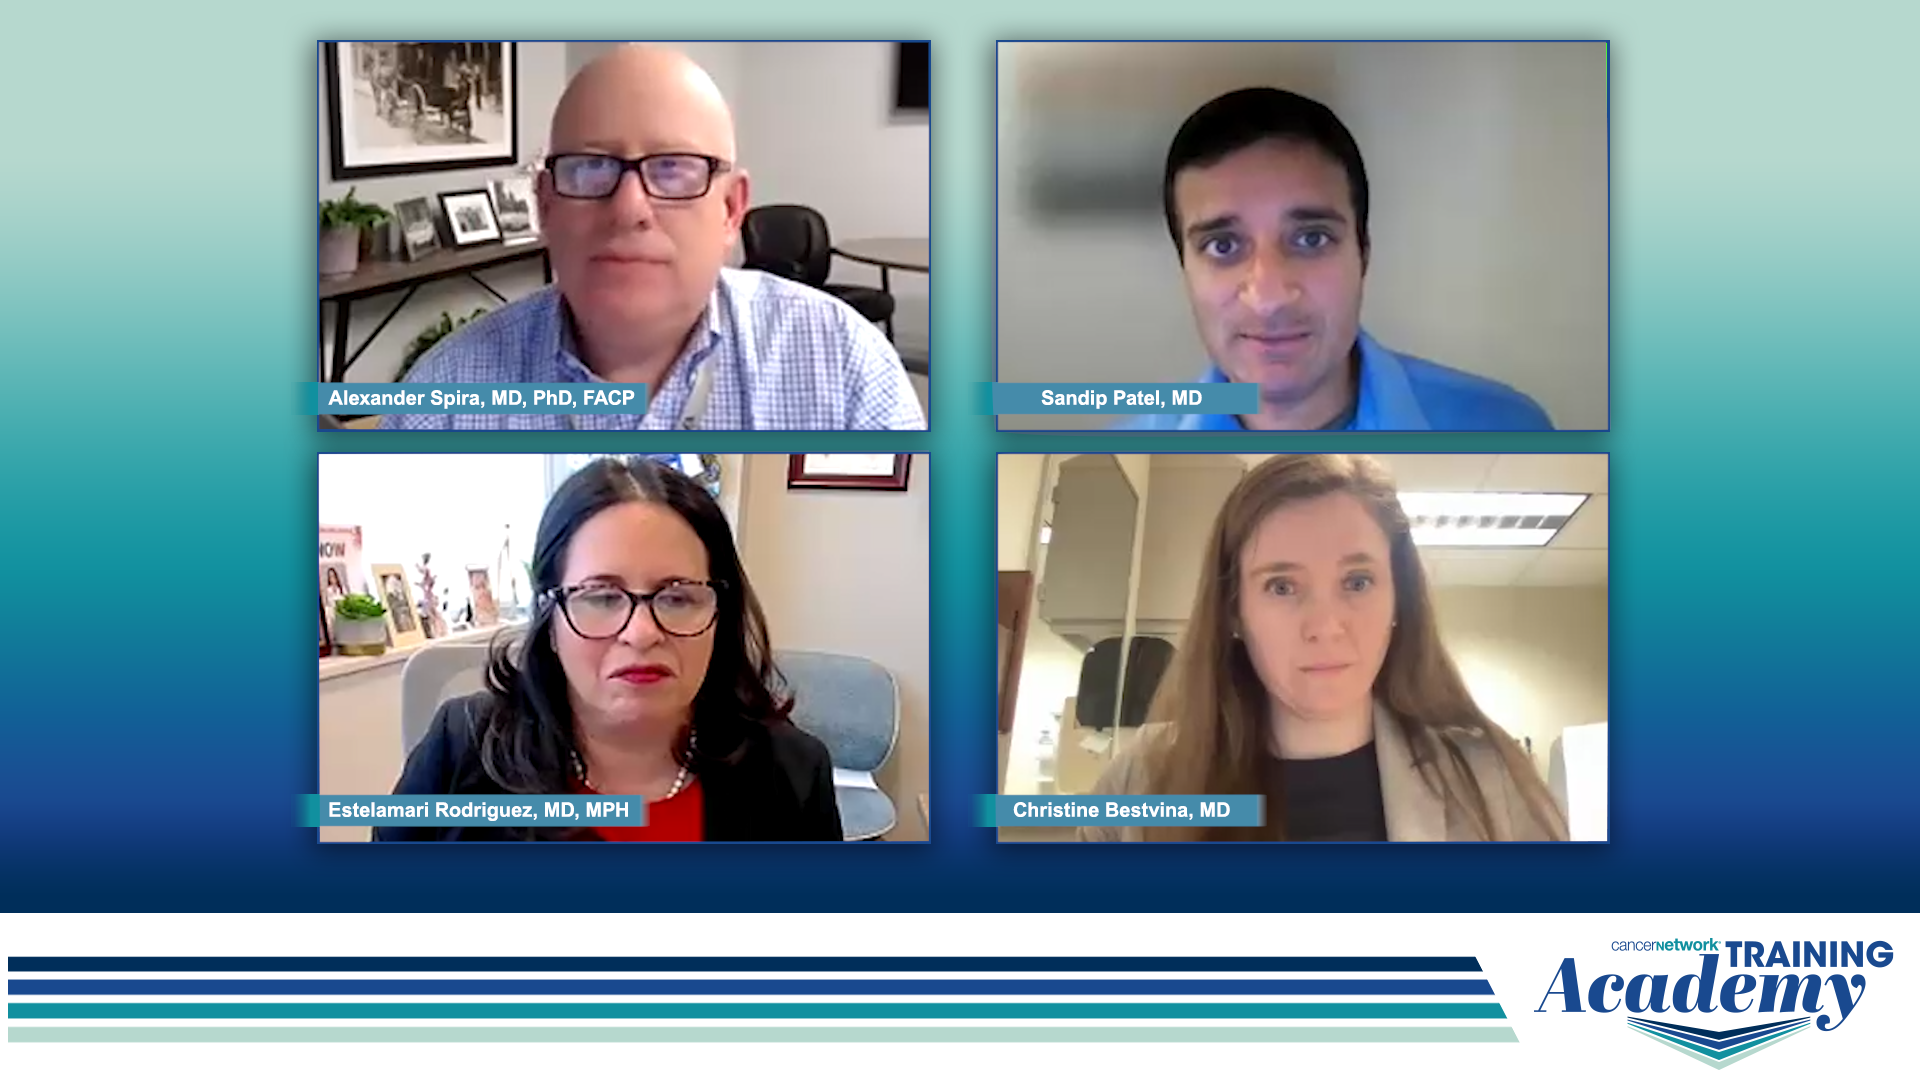 Video 8 - "Closing Thoughts on the Future of NSCLC"